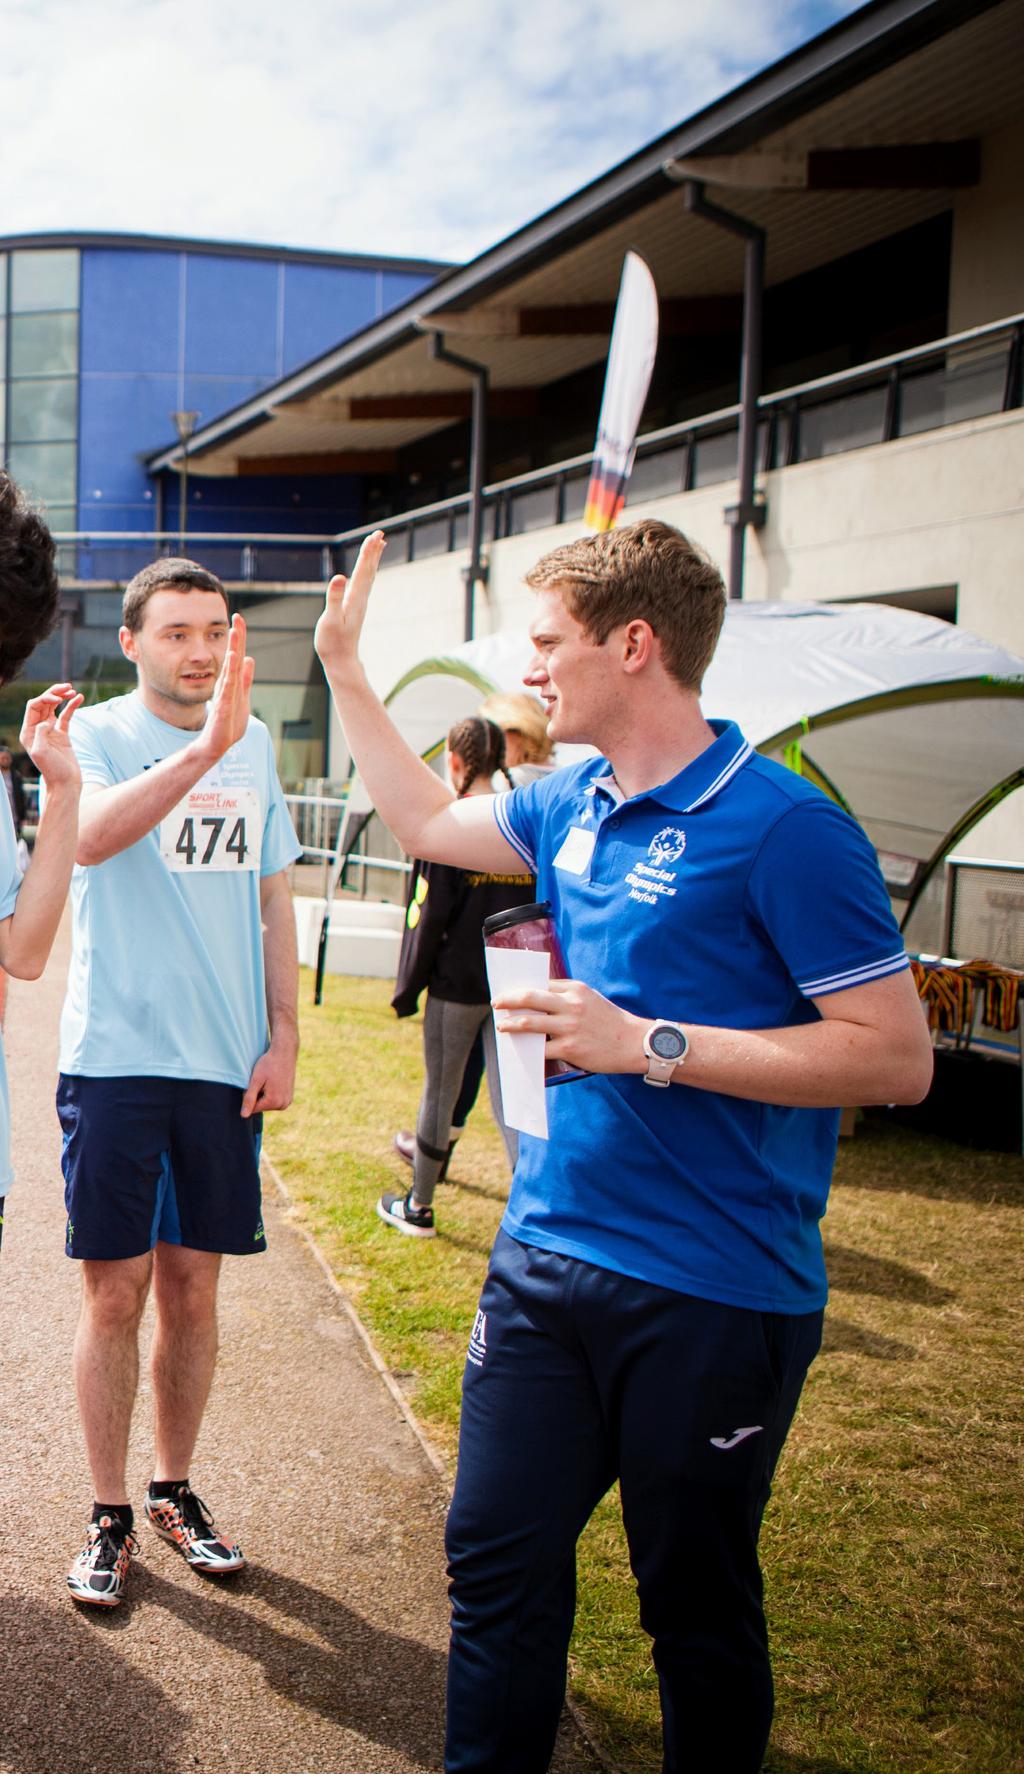 OUTCOMES AN IMPACT Wider Purpose of Scheme: Any Delivery Deadlines: To raise the quality of the volunteering experience in Athletics and Running for existing volunteers, share the benefits with new,